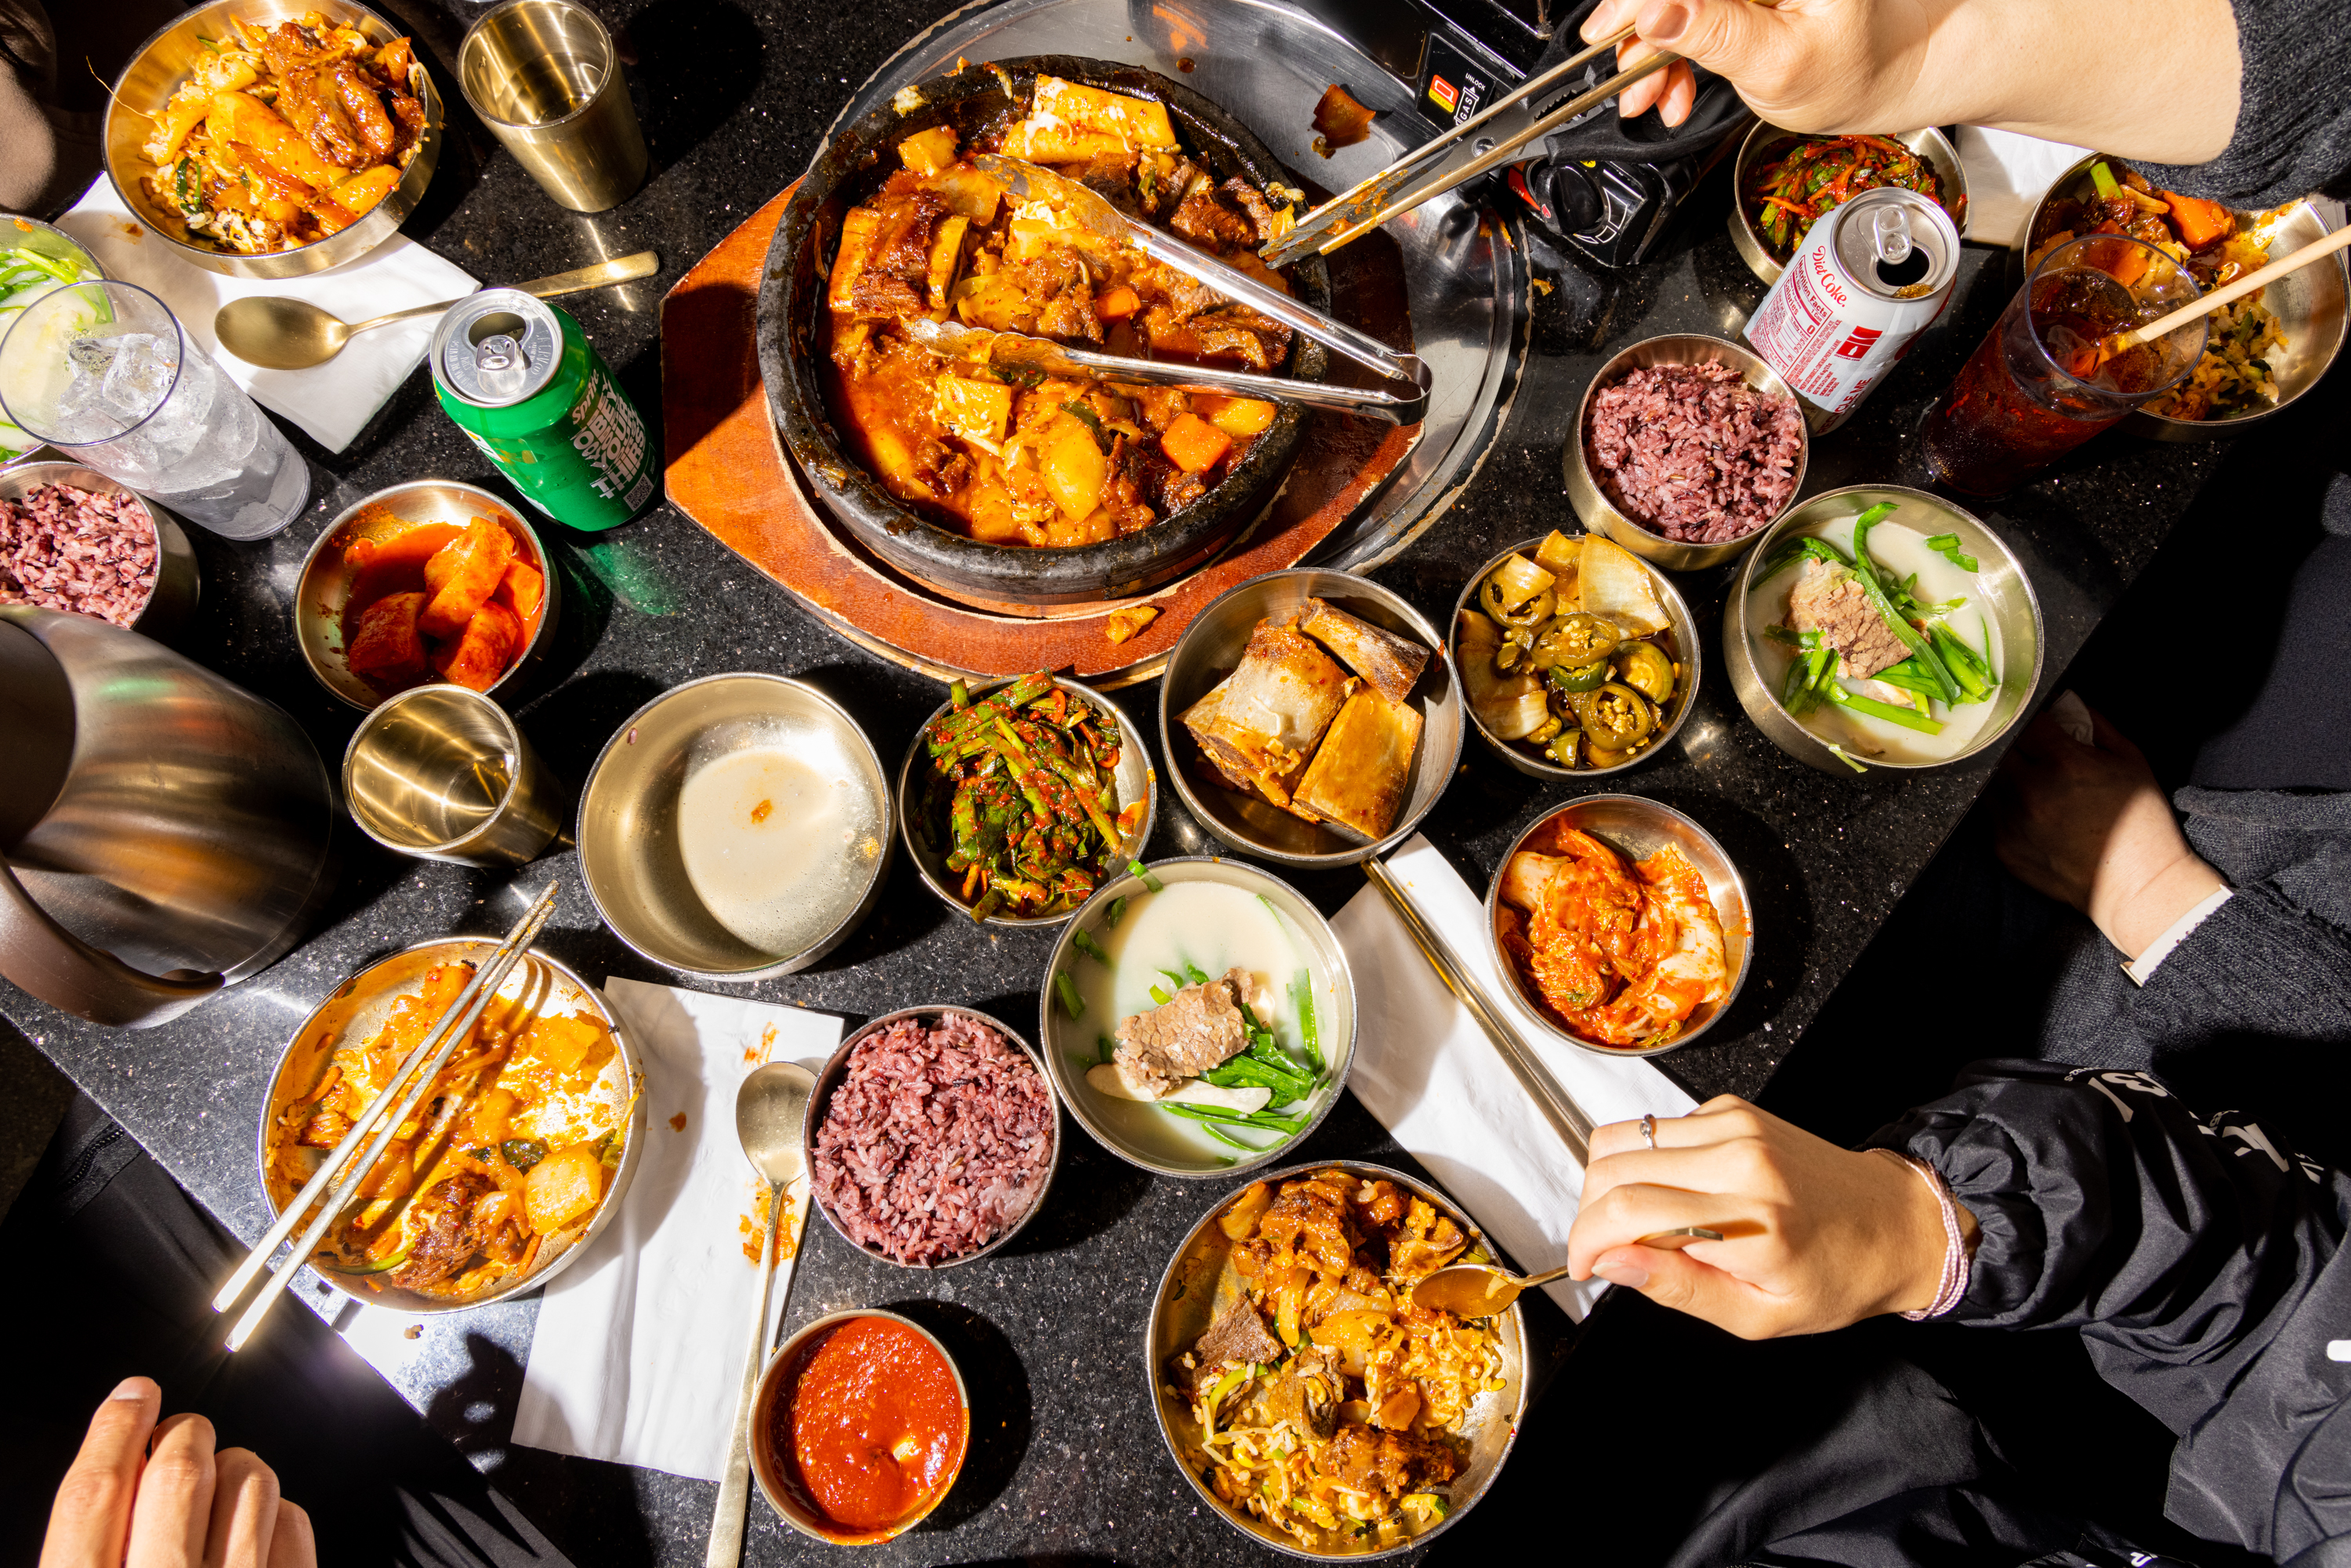 People are sharing a vibrant Korean meal with kimchi, rice, various stews, and side dishes spread out on a table. Drinks include soda cans and water.